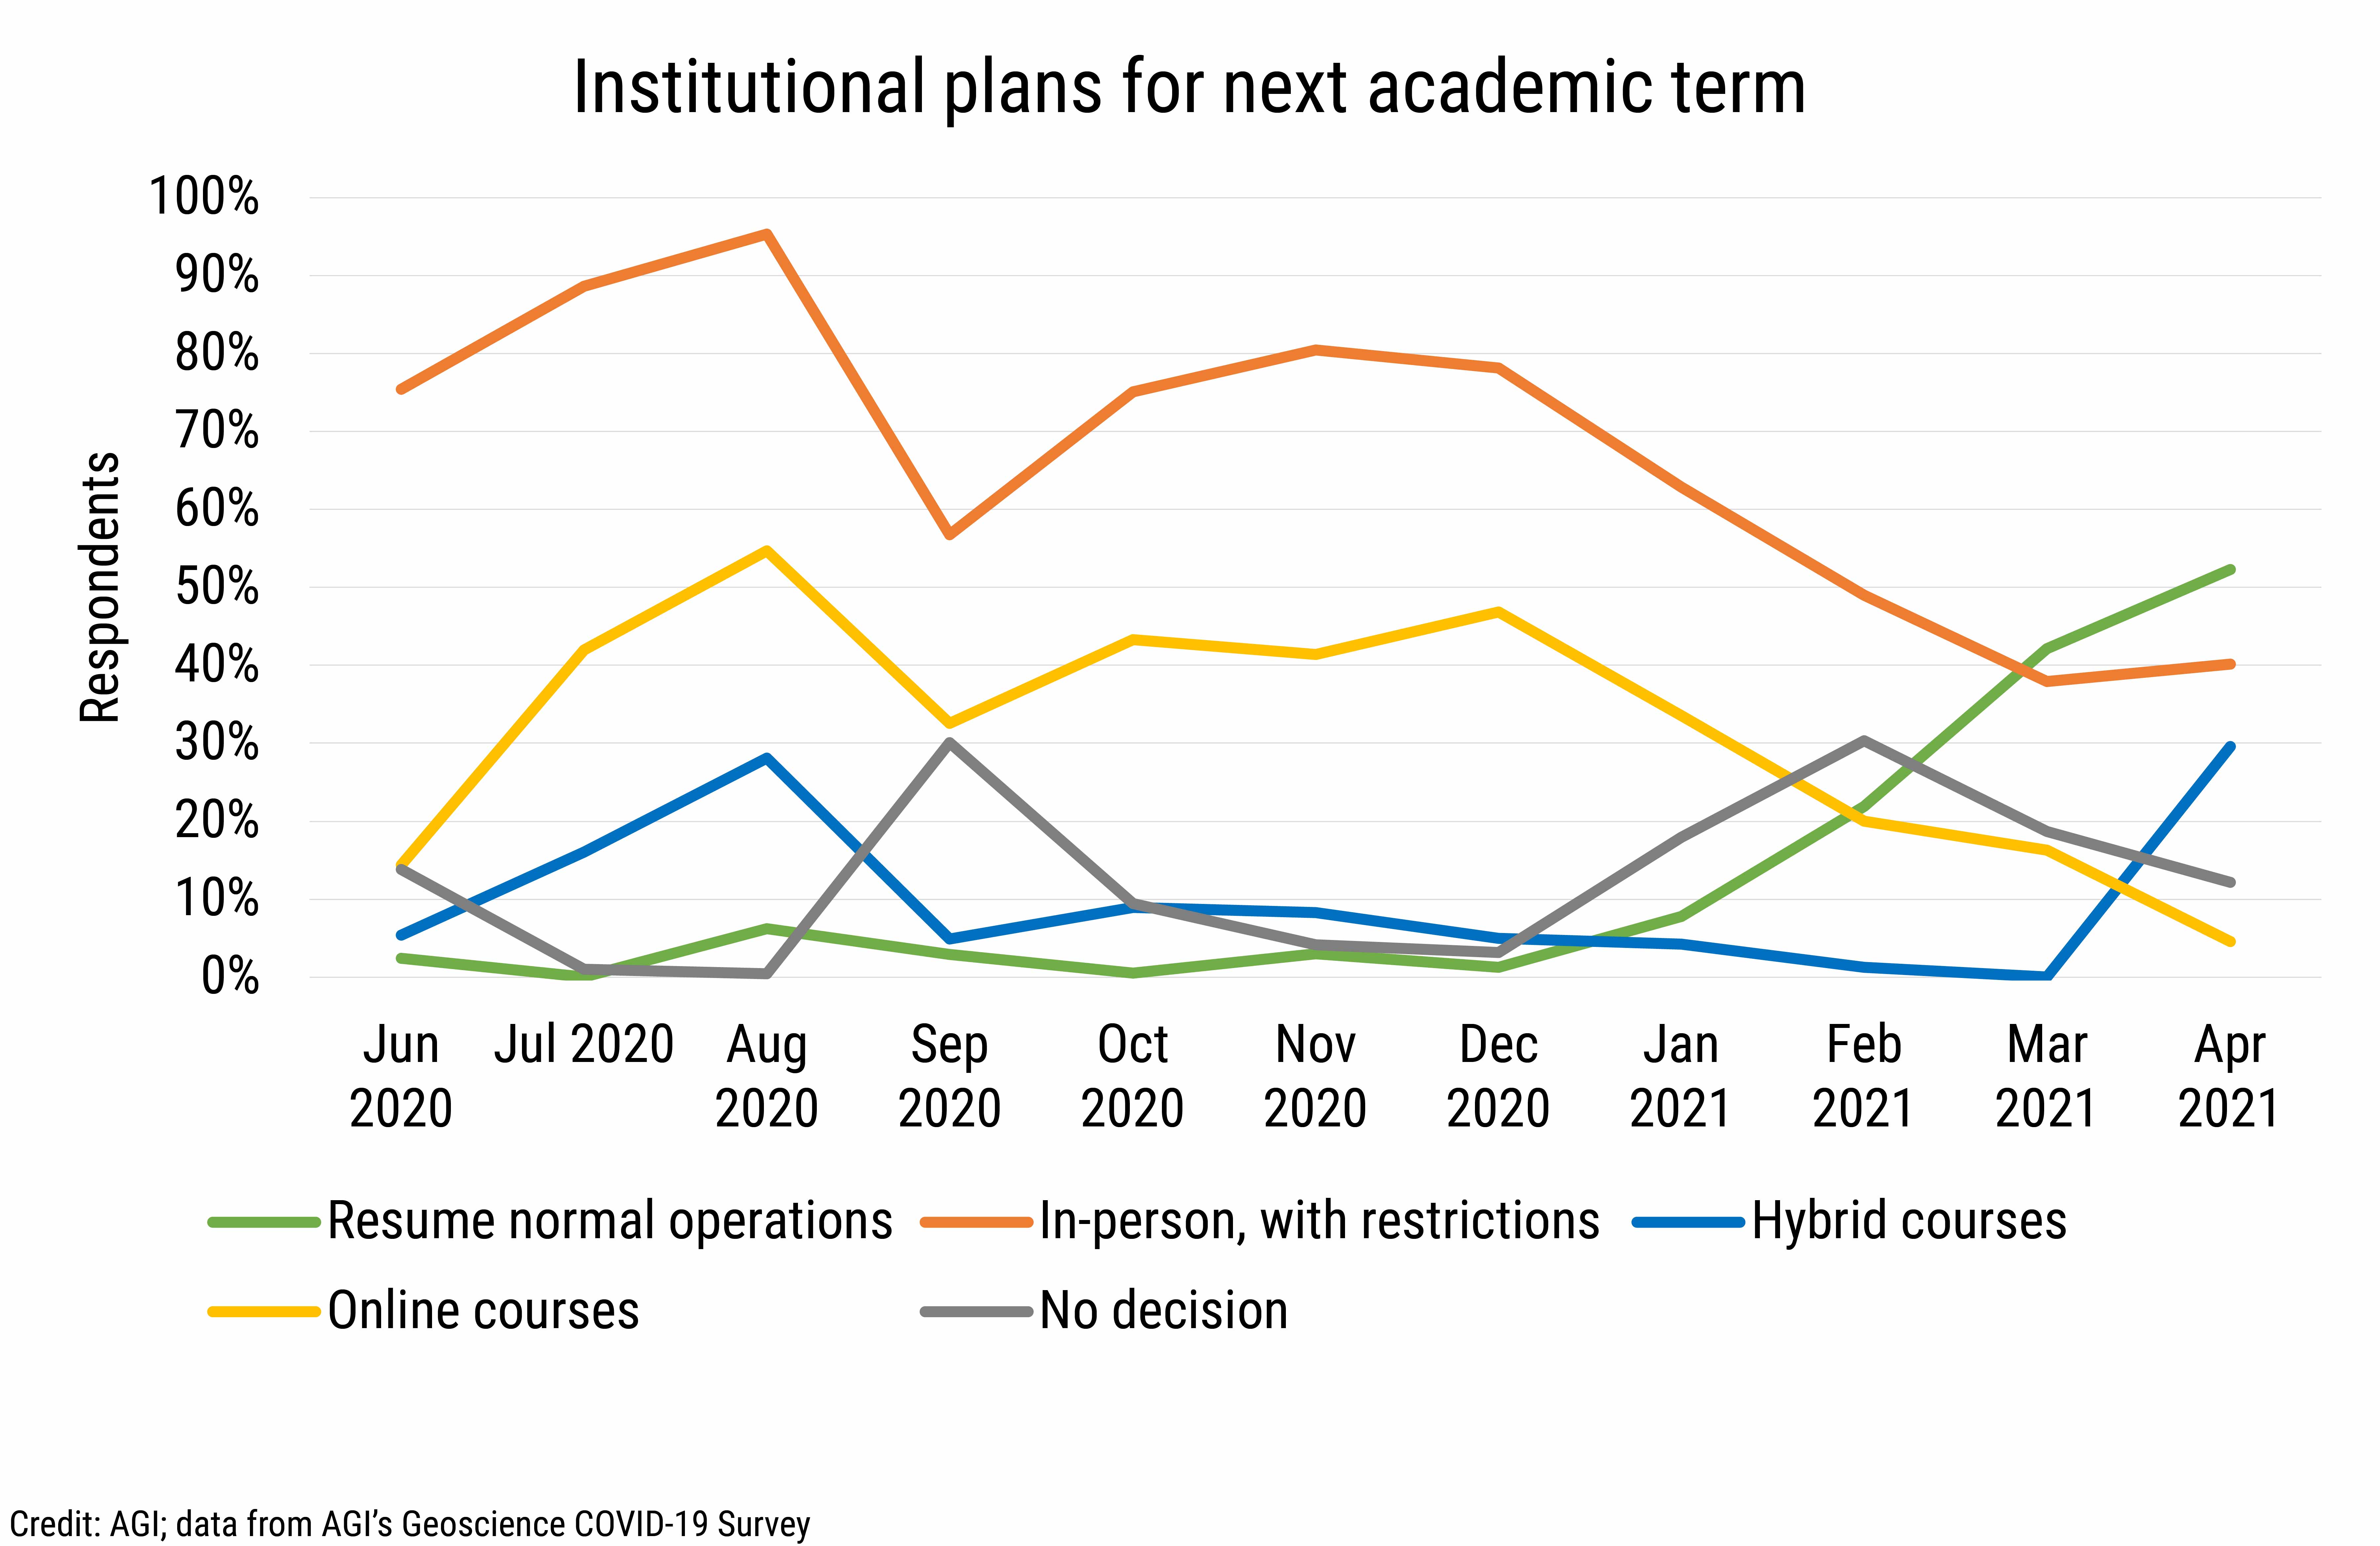 DB_2021-014 chart 12: Institutional plans for next academic term (Credit: AGI; data from AGI's Geoscience COVID-19 Survey)